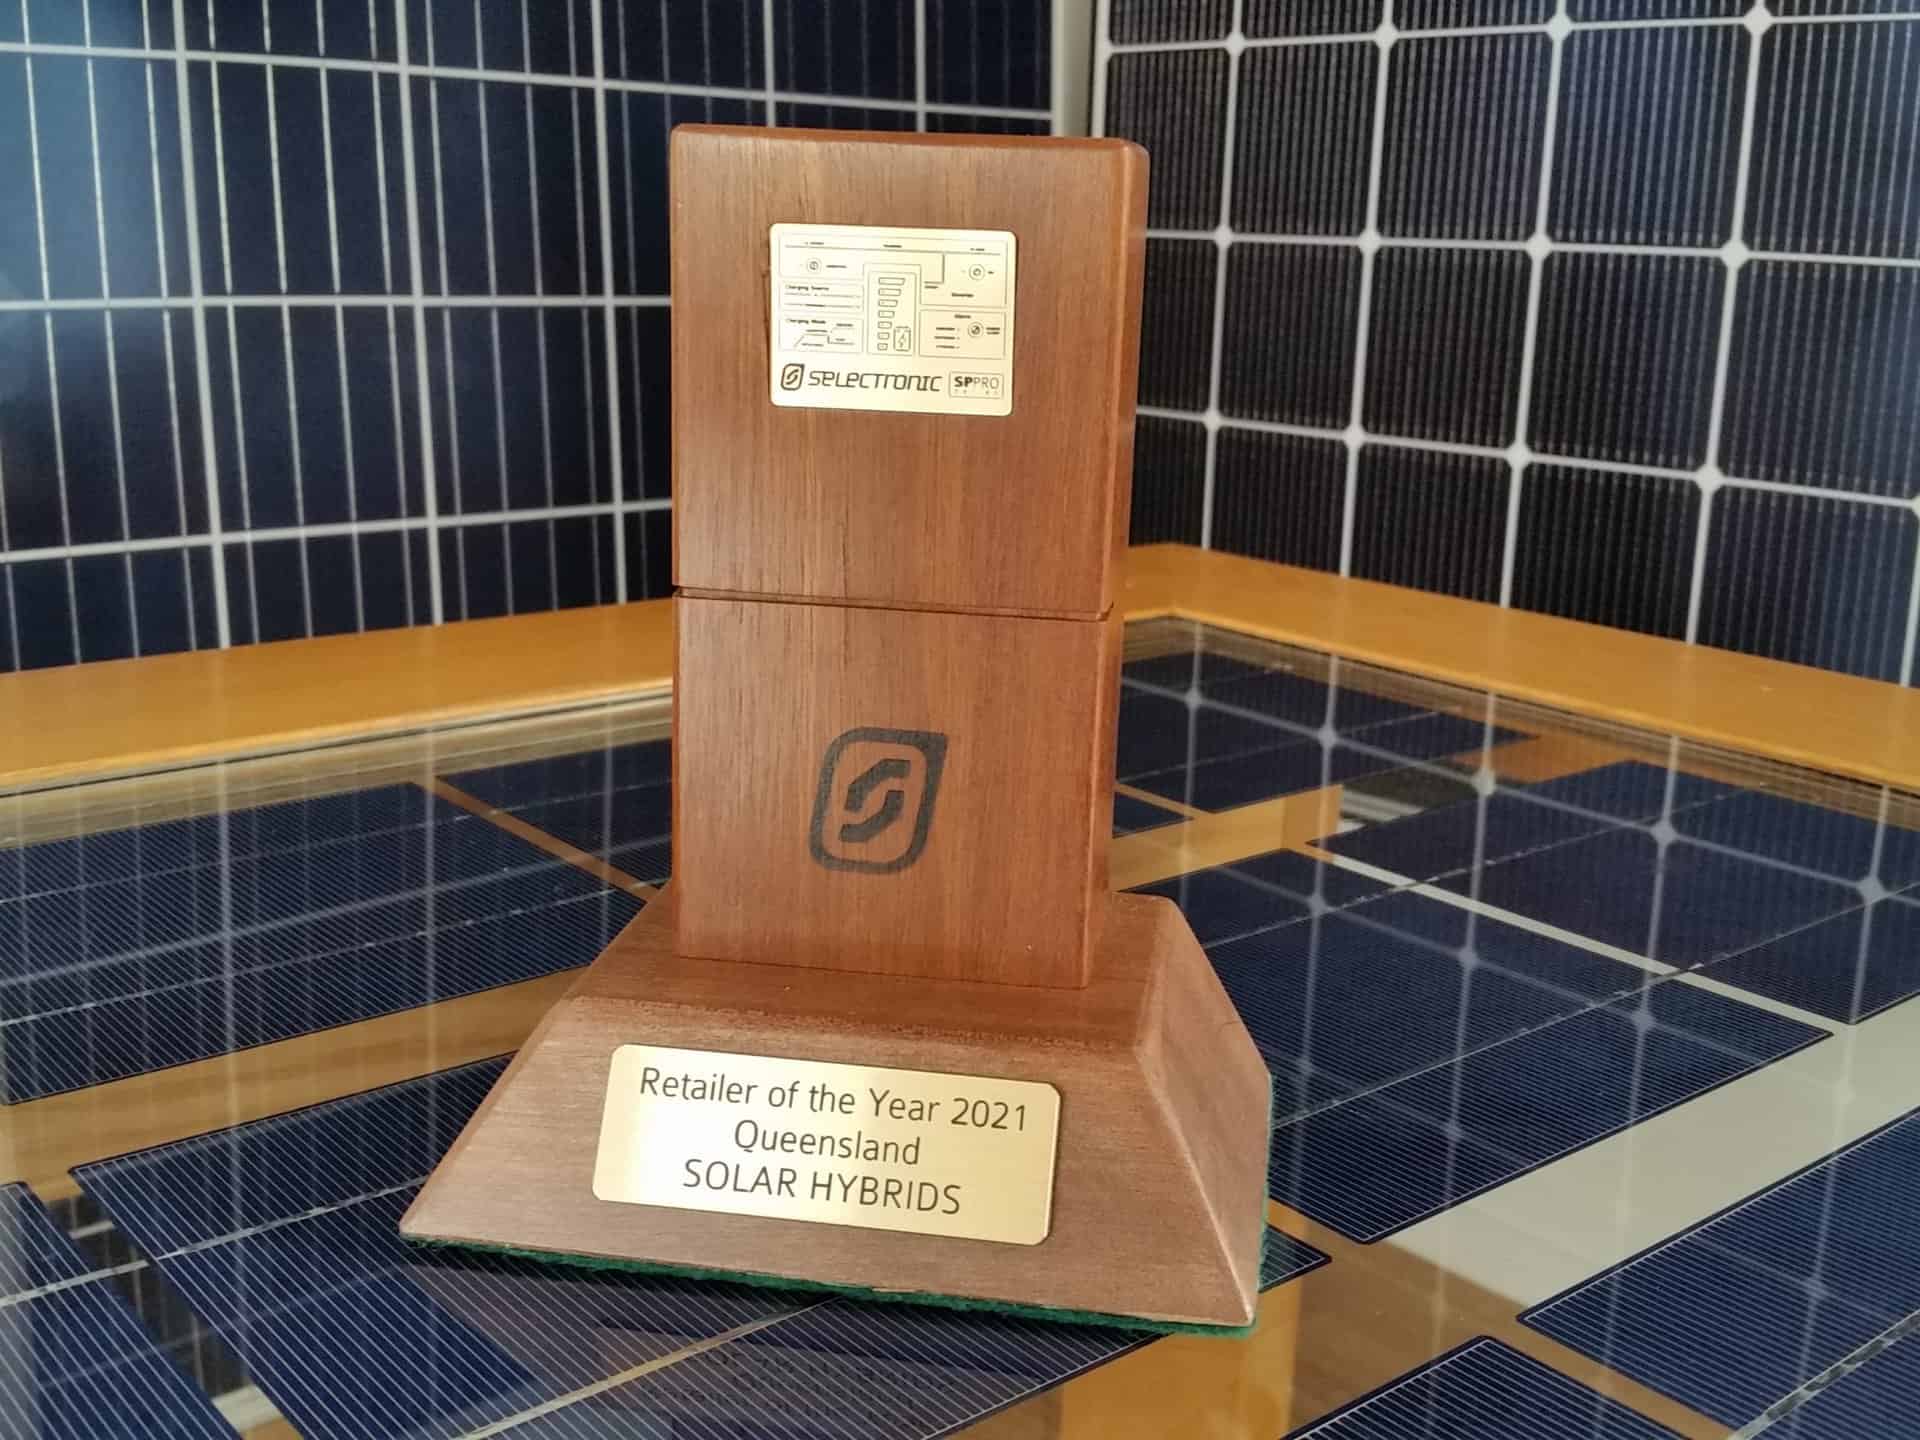 Solar Hybrids wins Selectronic Retailer of the year Award for Qld 2021